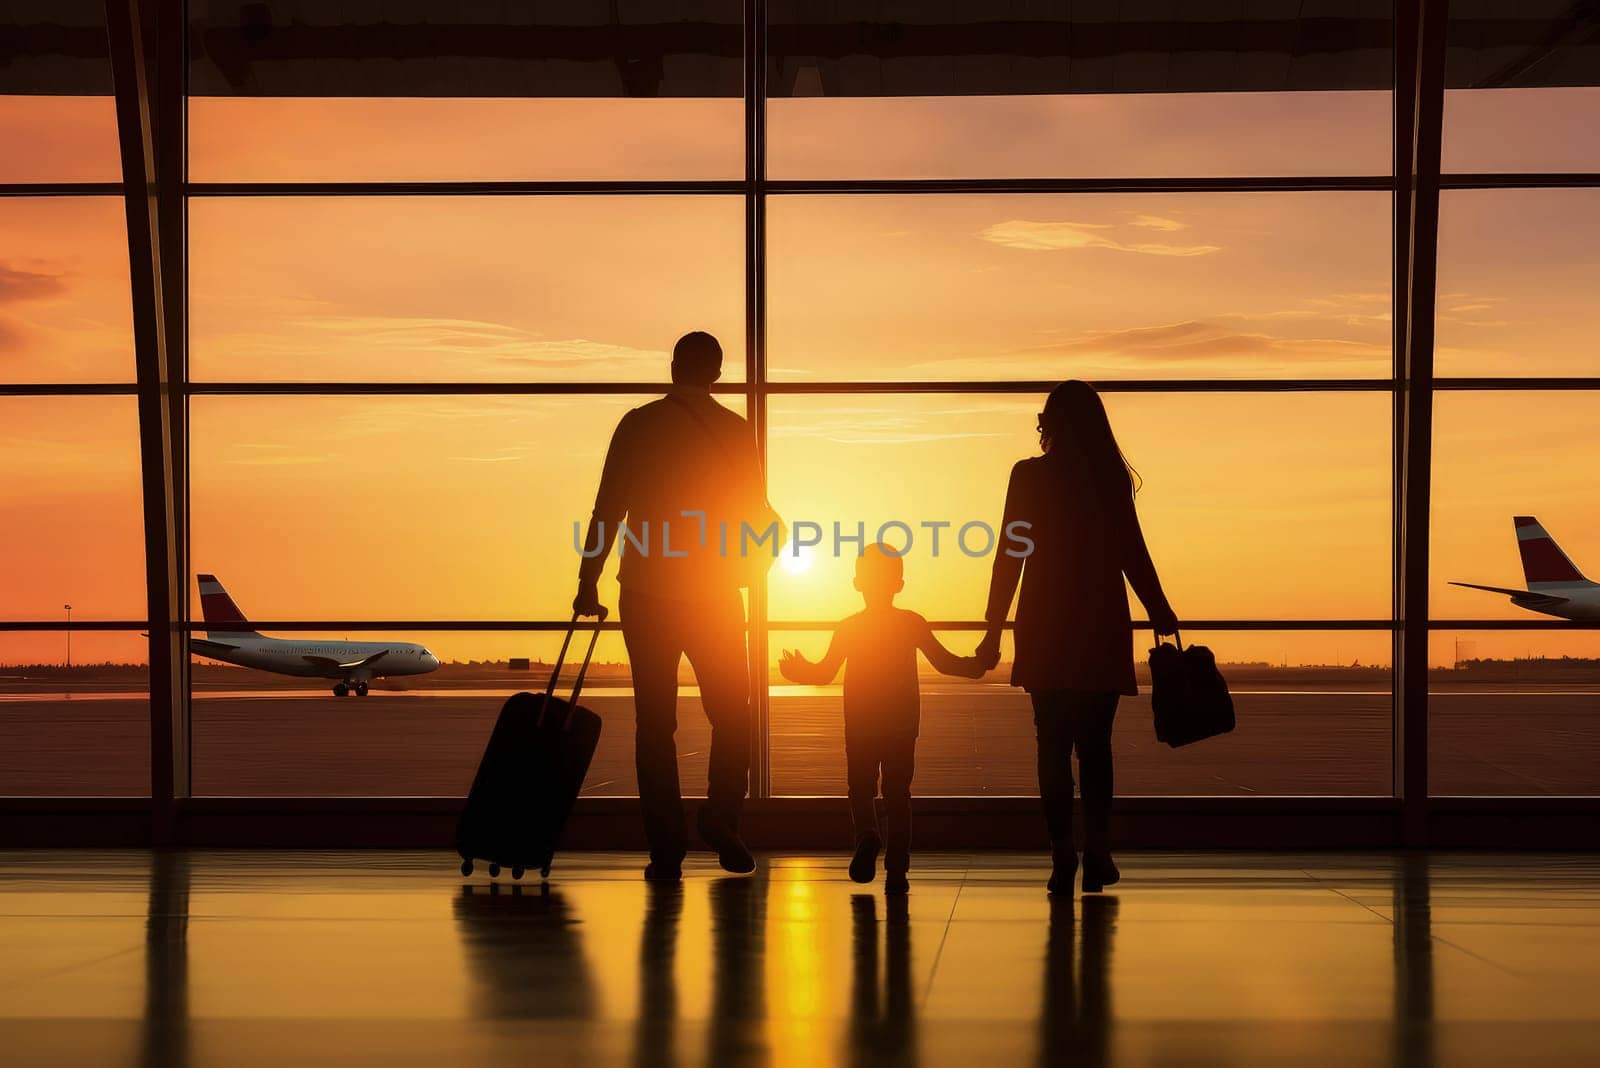 Silhouettes of people at airport by simpson33